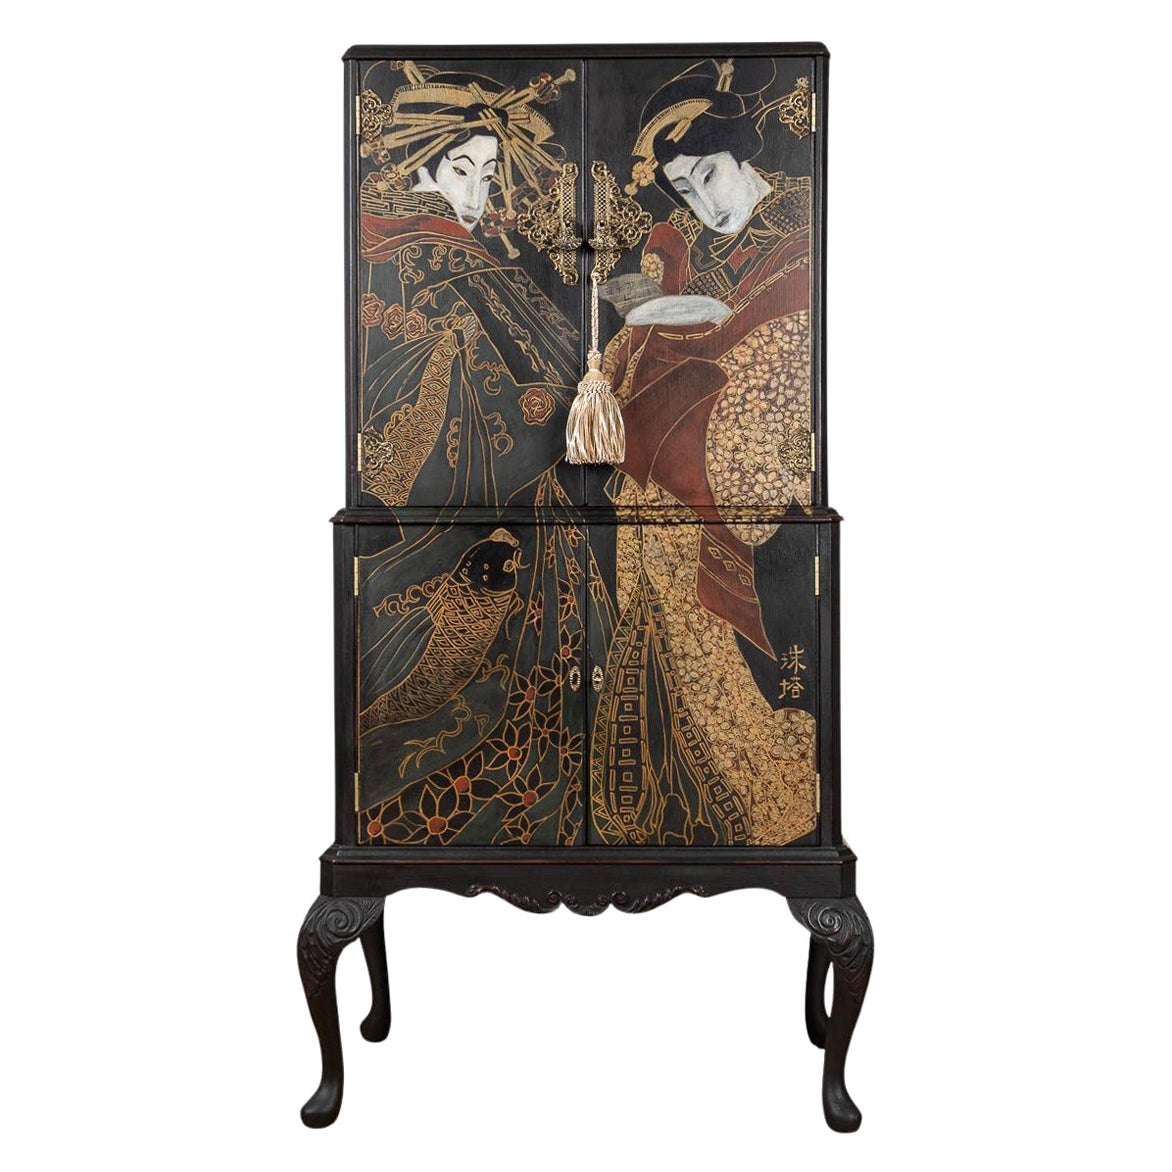 Japanesque Style Cocktail Cabinet Handpainted Depicting A 'Geisha'